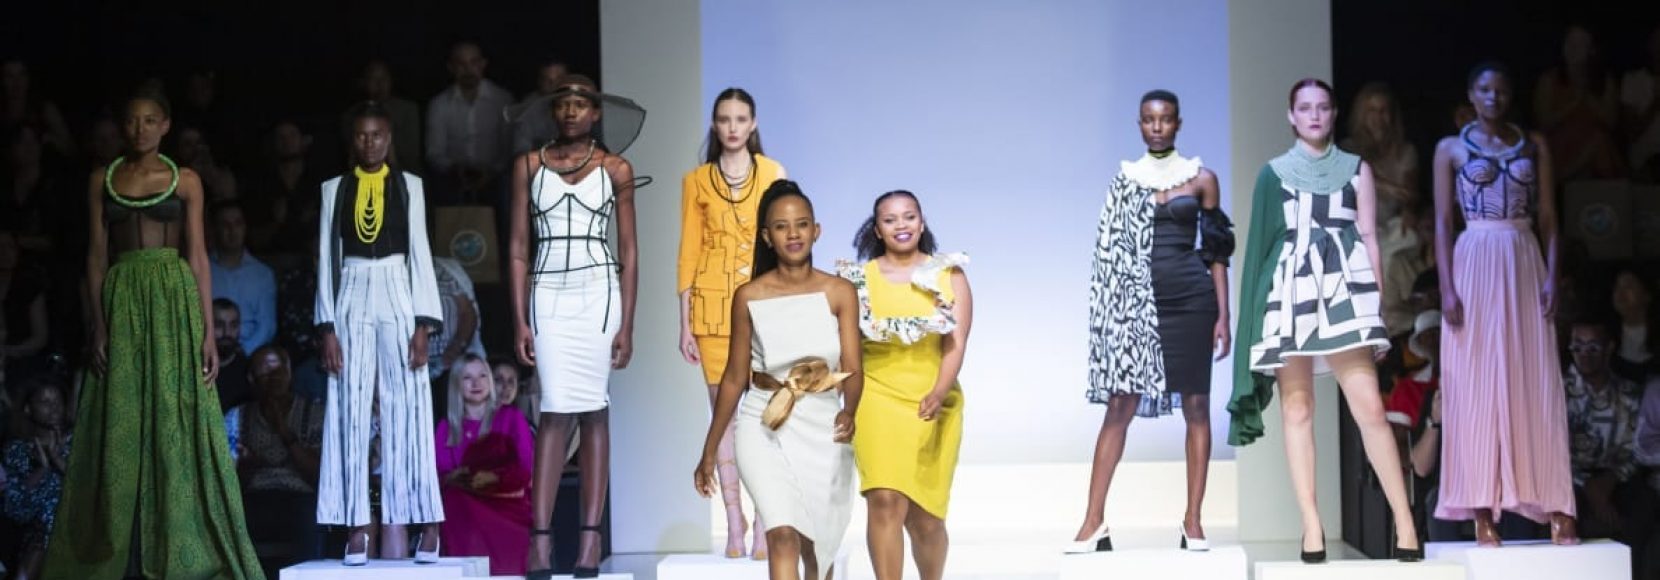 Models on the runway at a fashion show during South Africa Fashion Week 2019